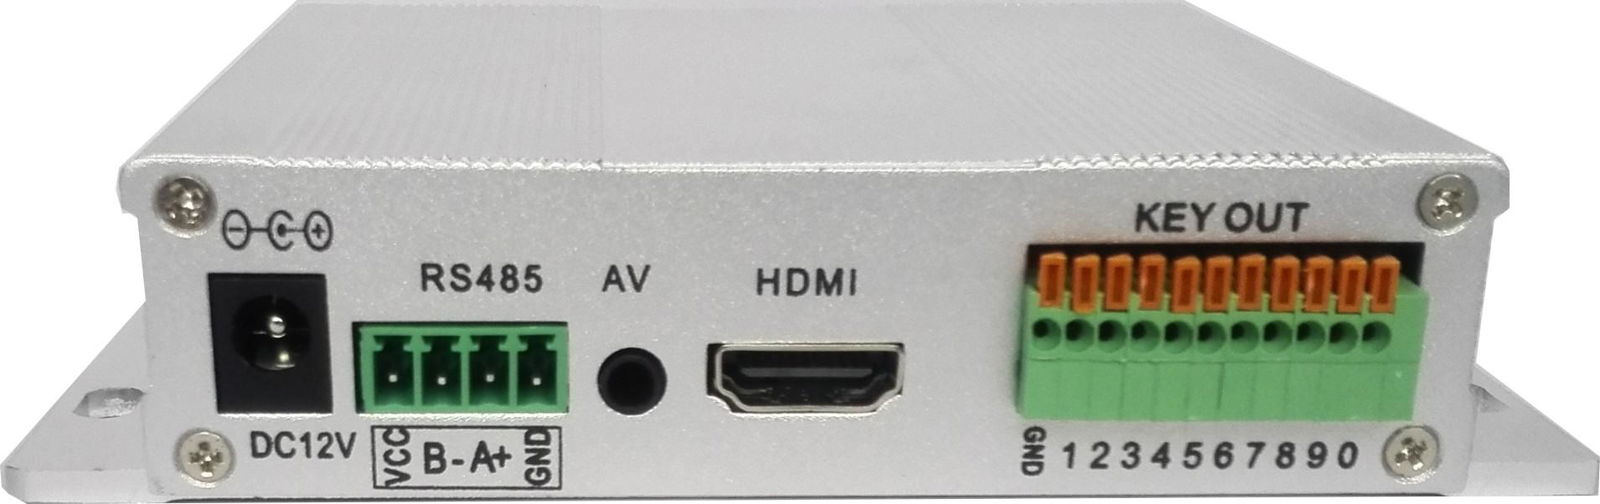 Touch key HD video serial port RS485 to control  player 3